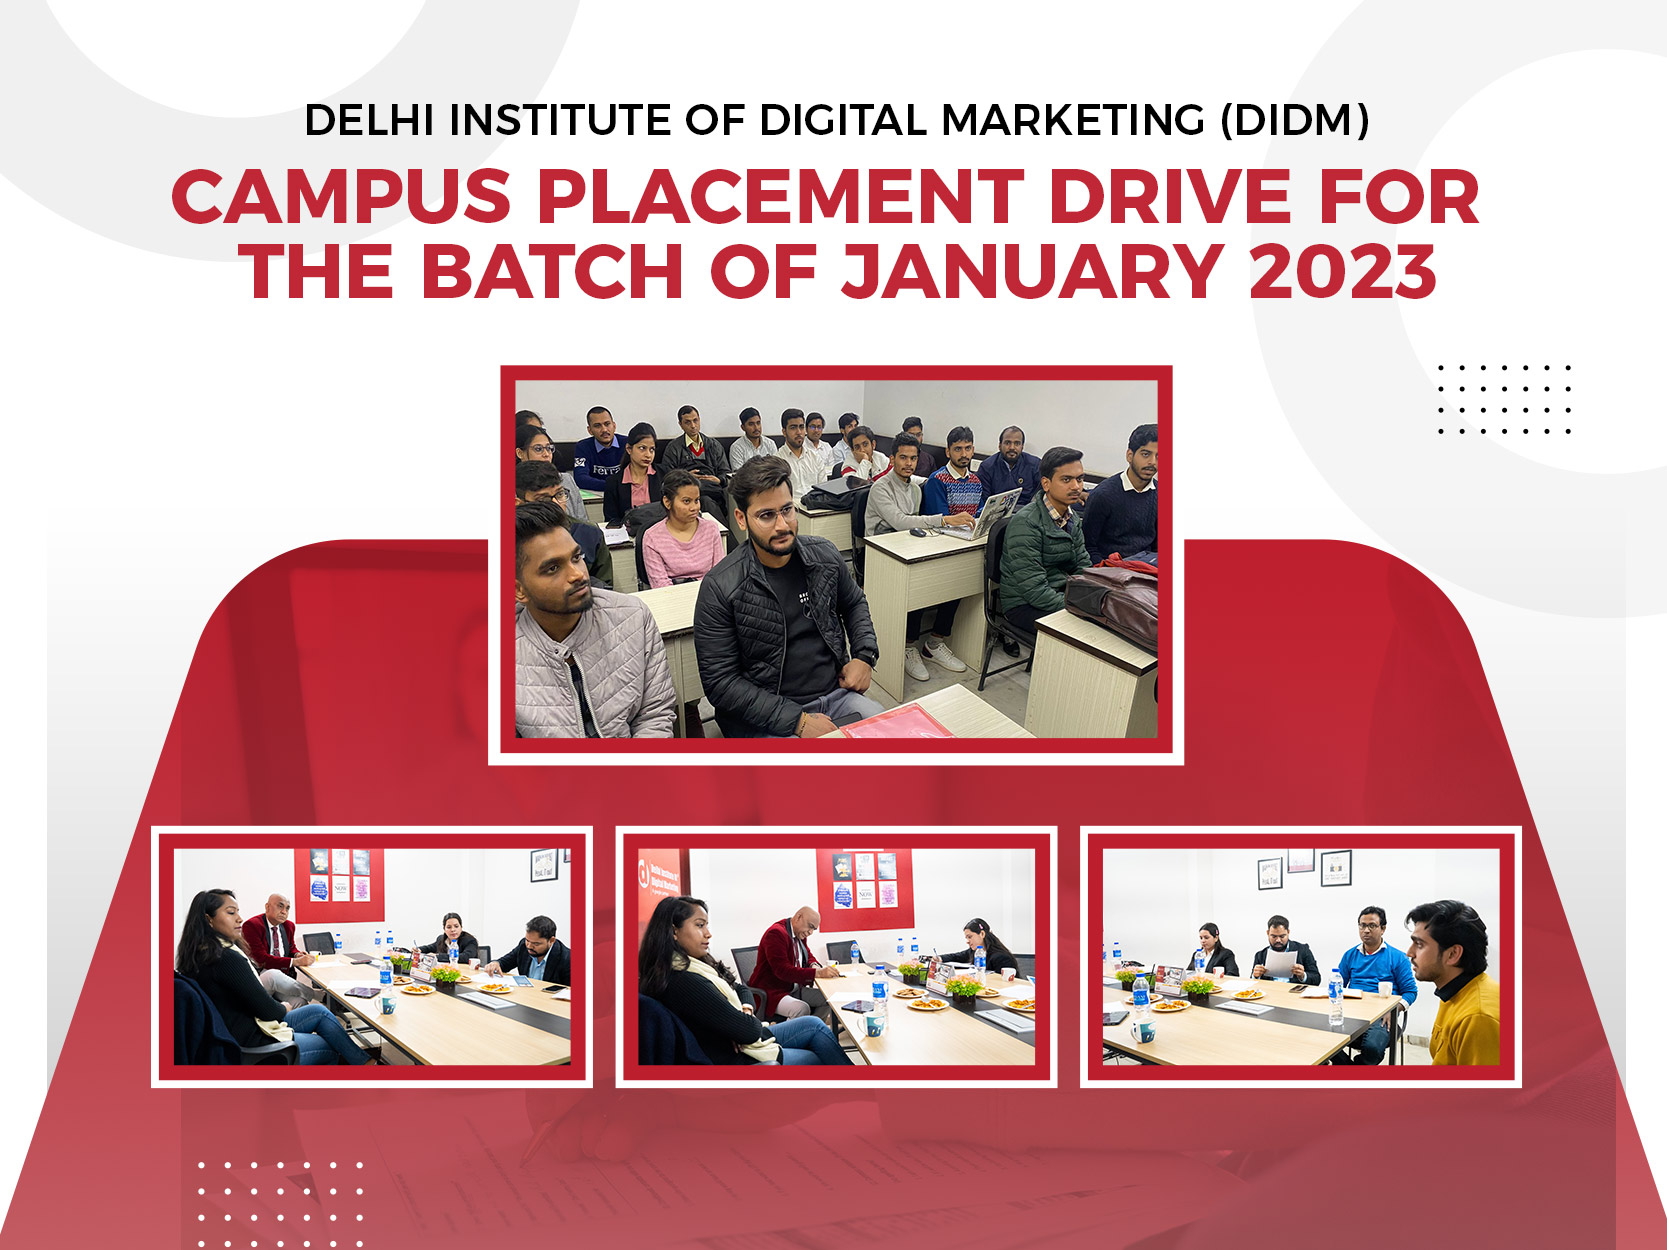 DIDM Conducts An Offline Campus Placement Drive 